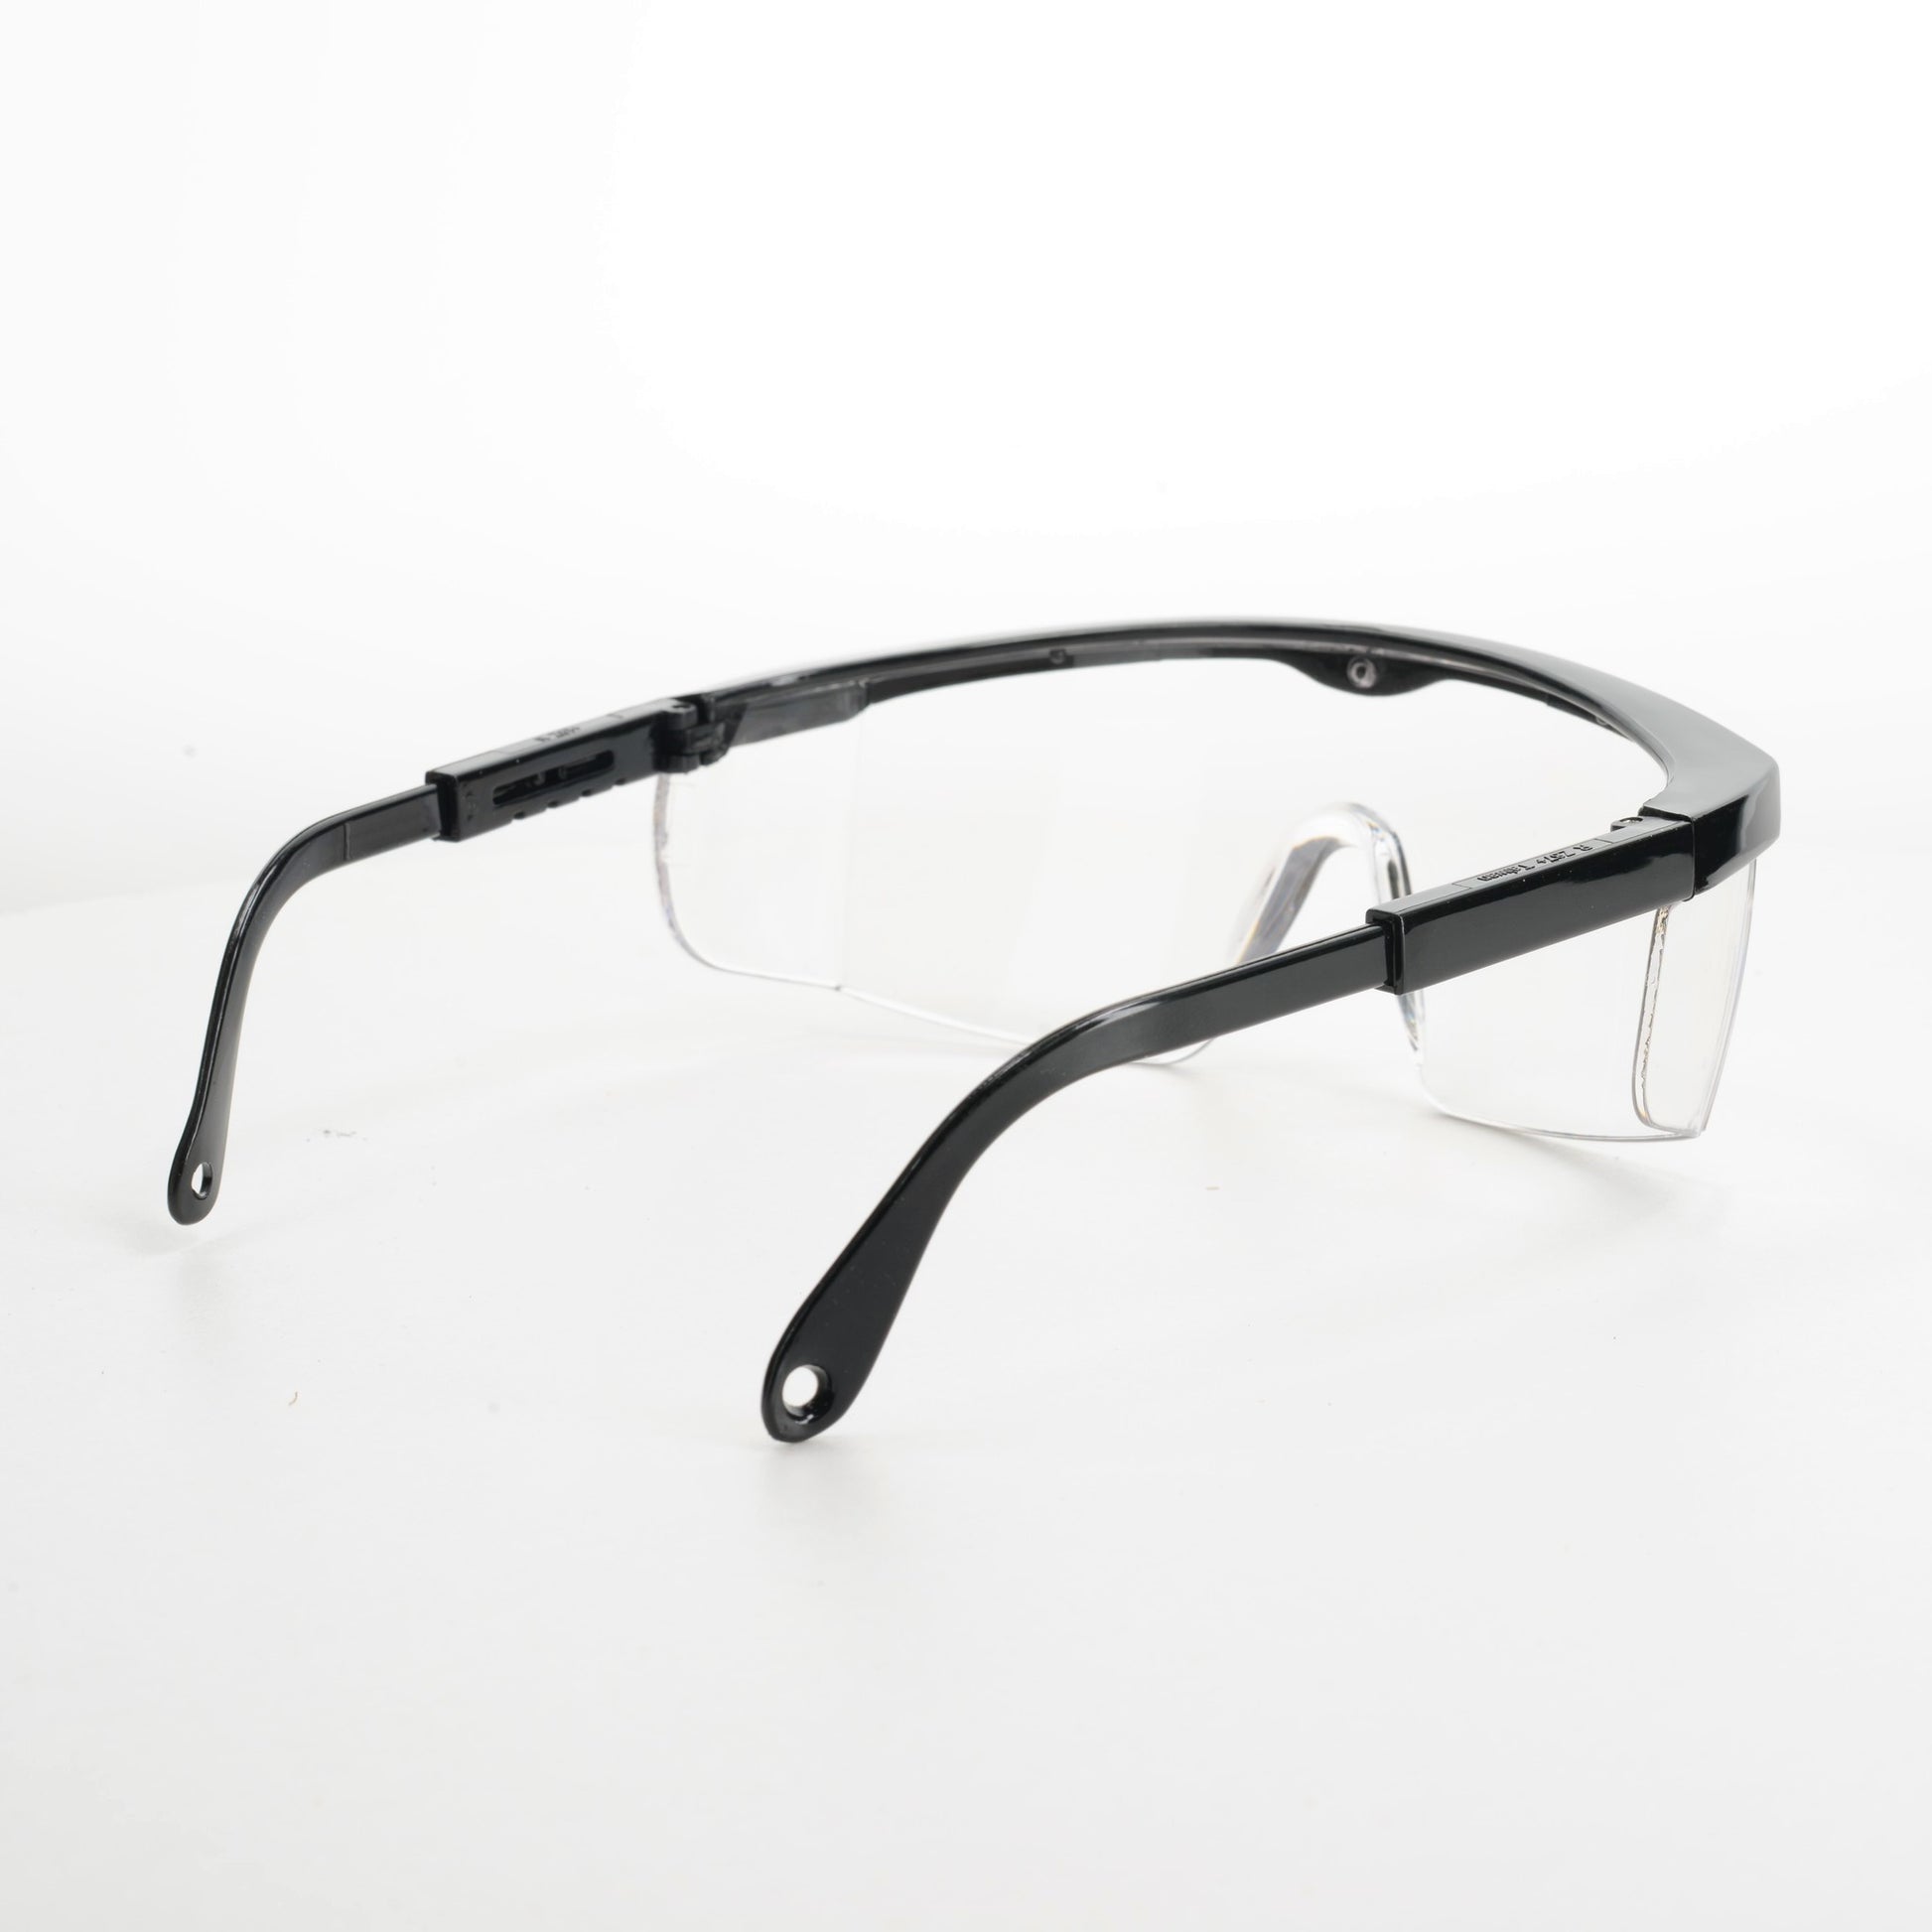 Safety glasses viewed from right rear side